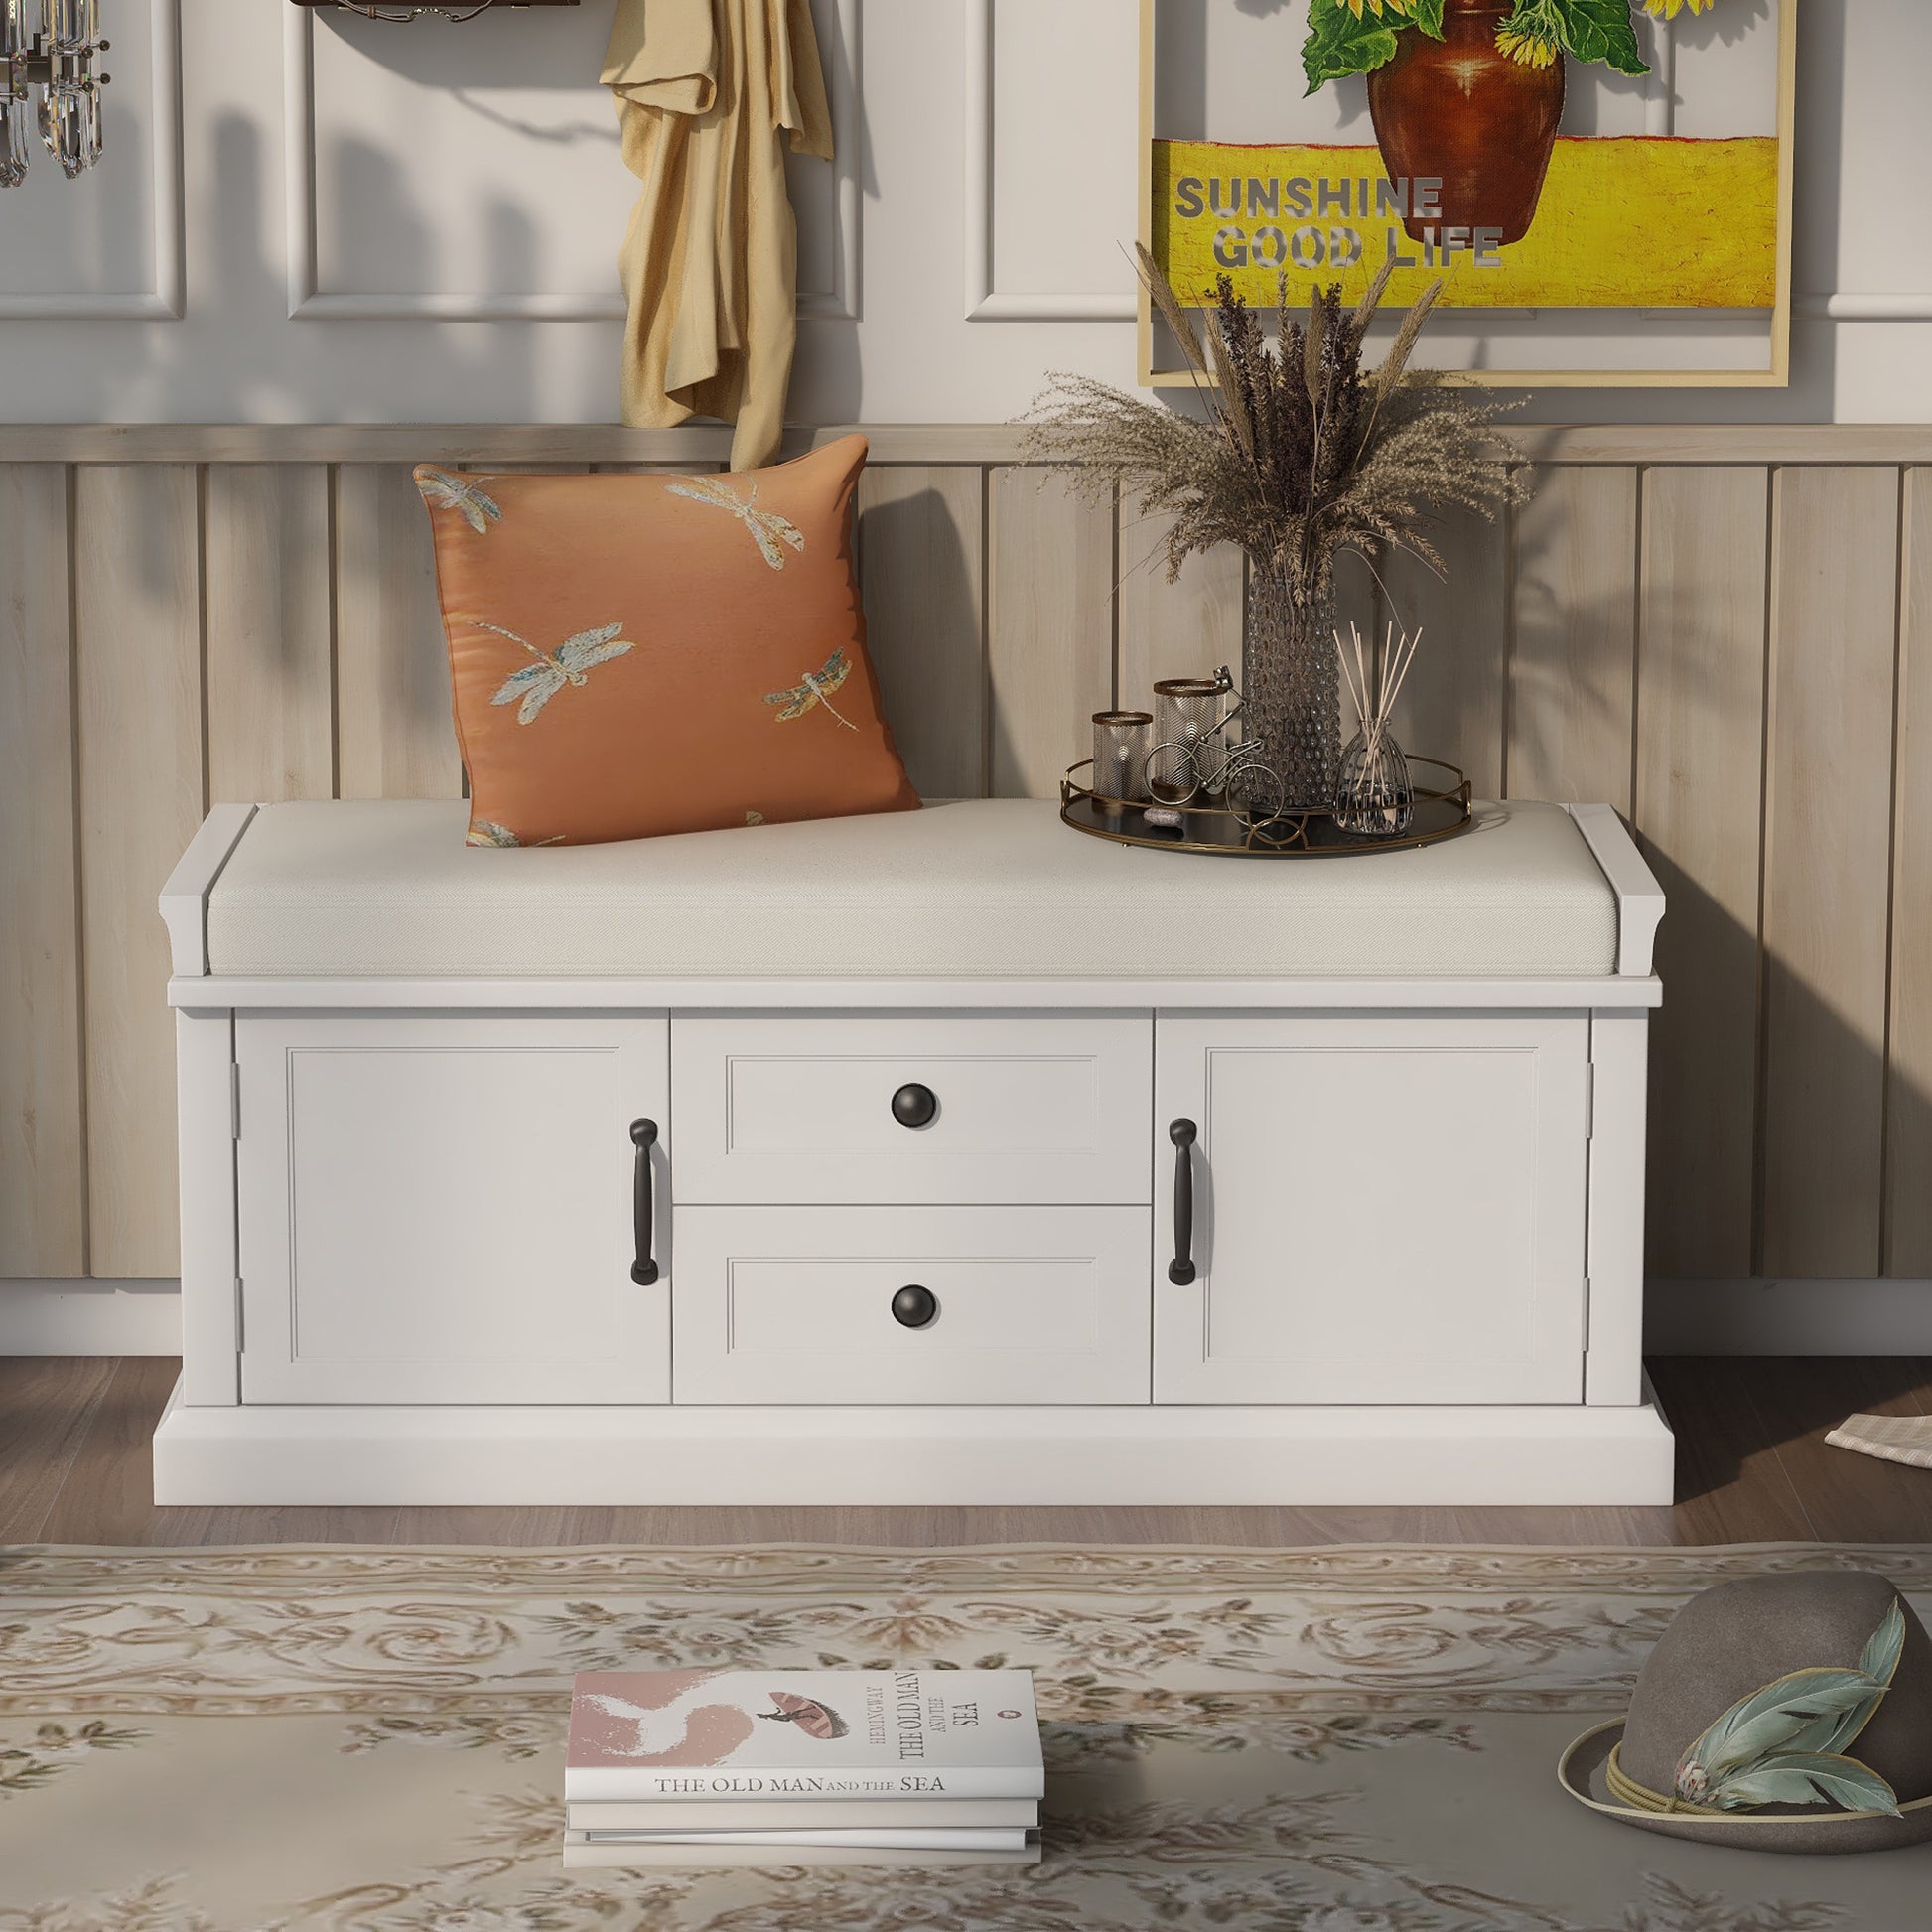 TREXM Storage Bench with 2 Drawers and 2 Cabinets - White